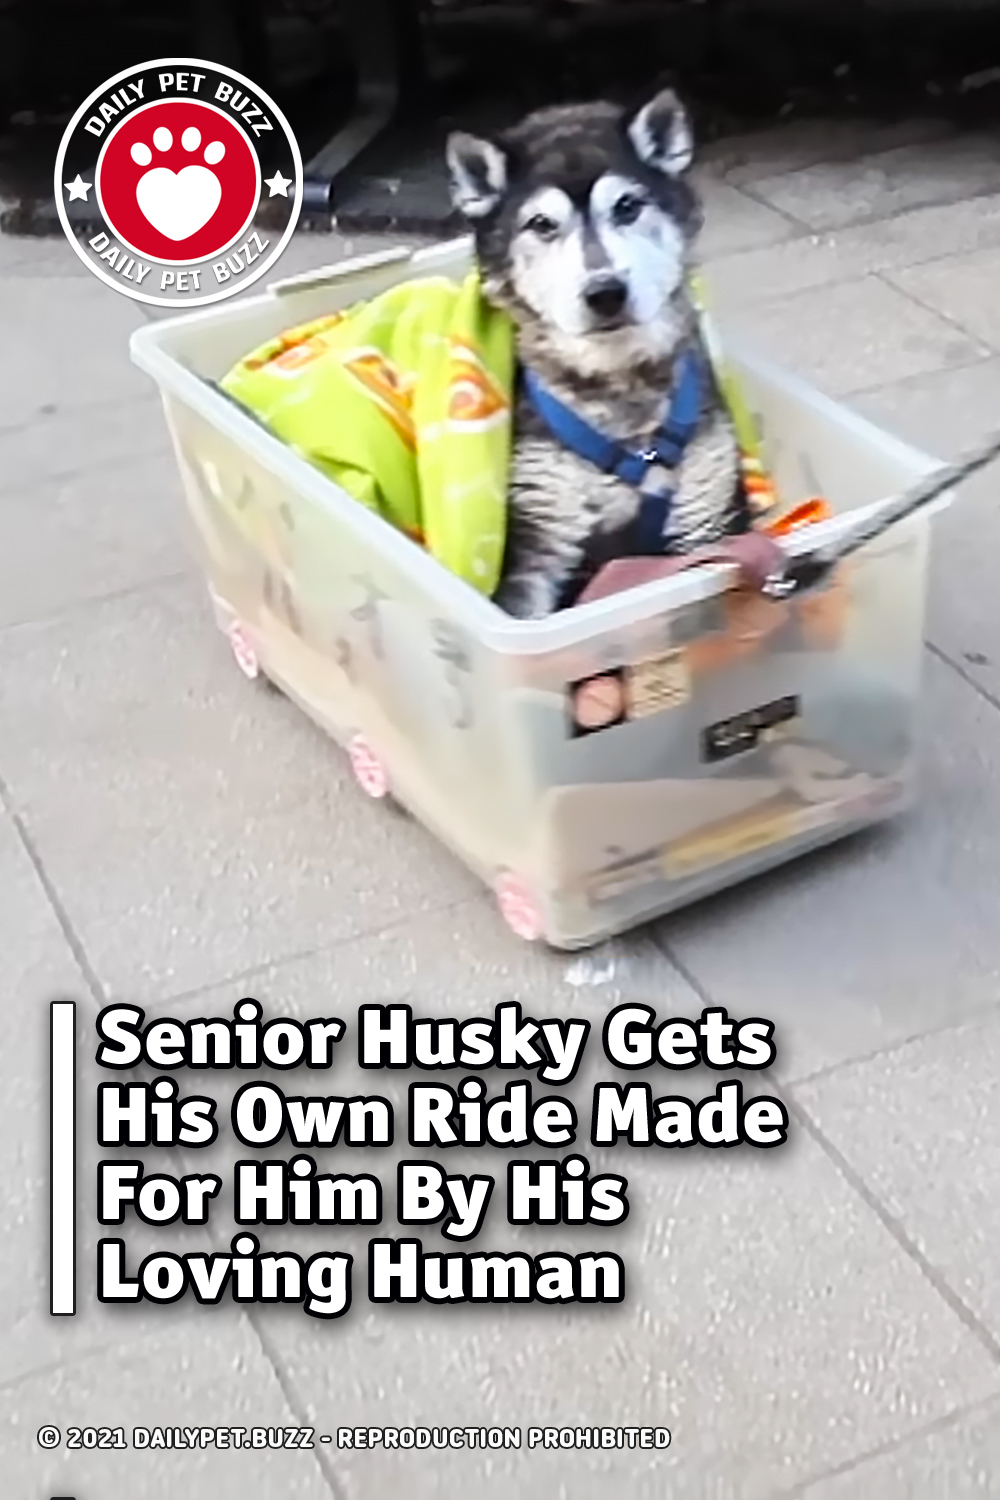 Senior Husky Gets His Own Ride Made For Him By His Loving Human